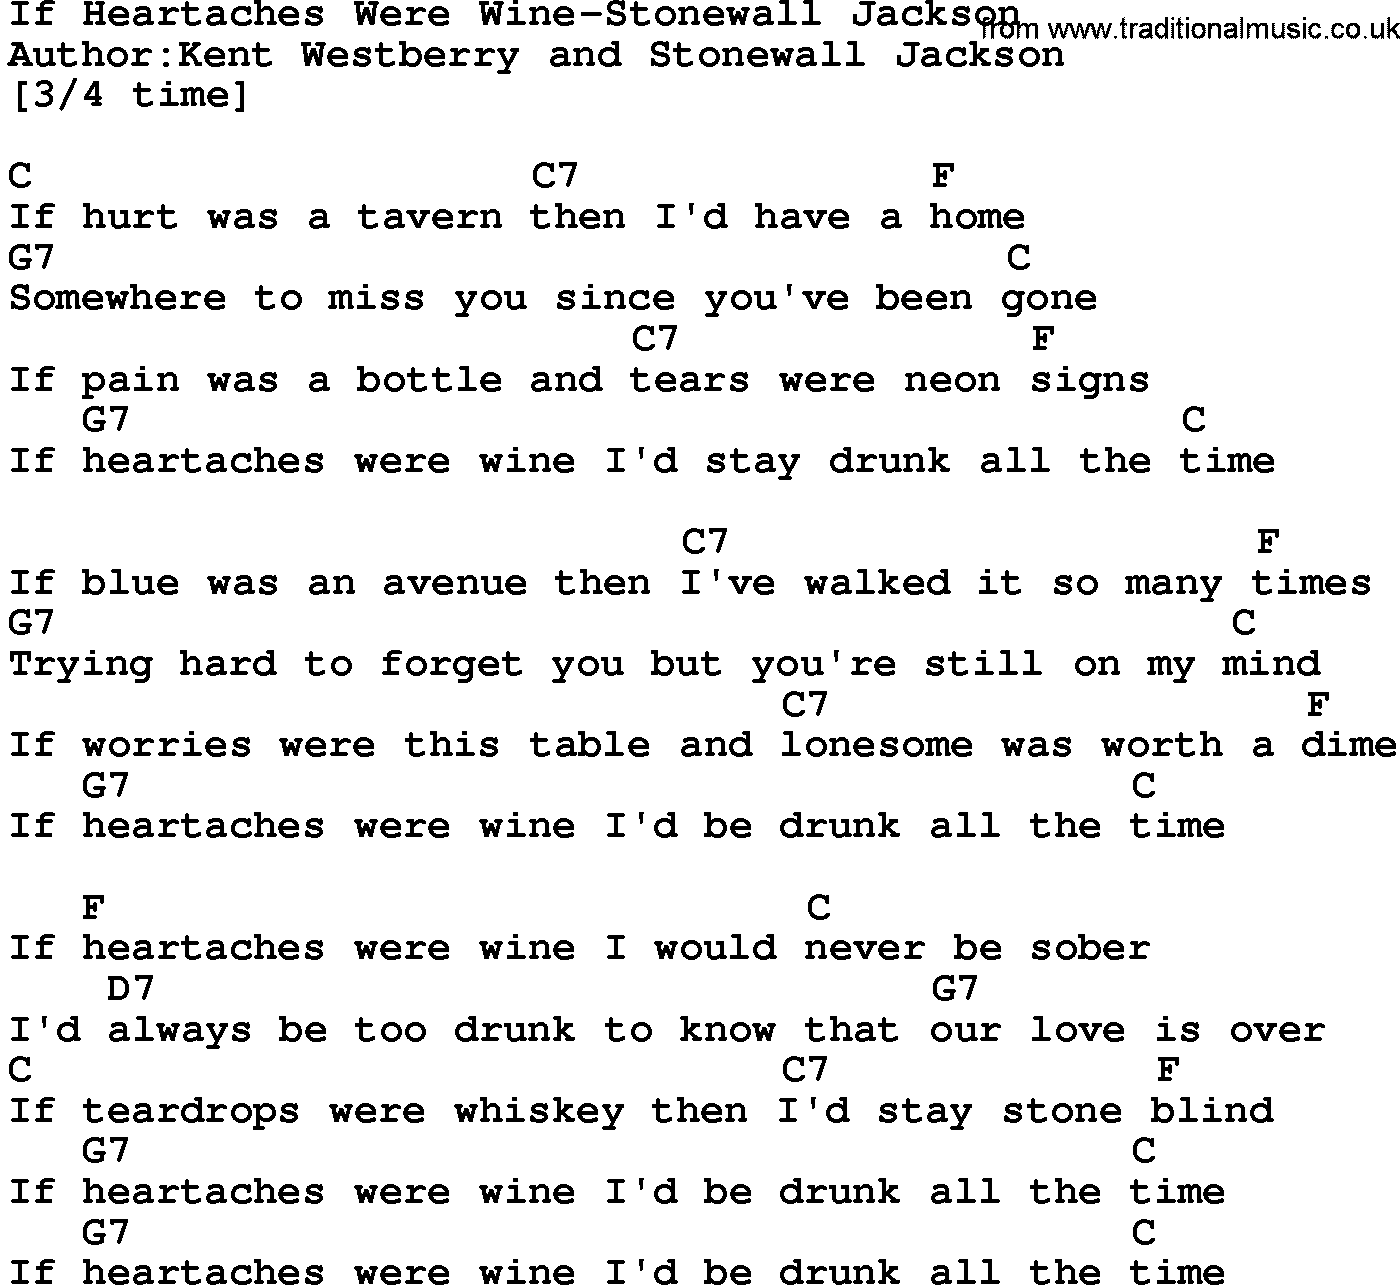 Country music song: If Heartaches Were Wine-Stonewall Jackson lyrics and chords